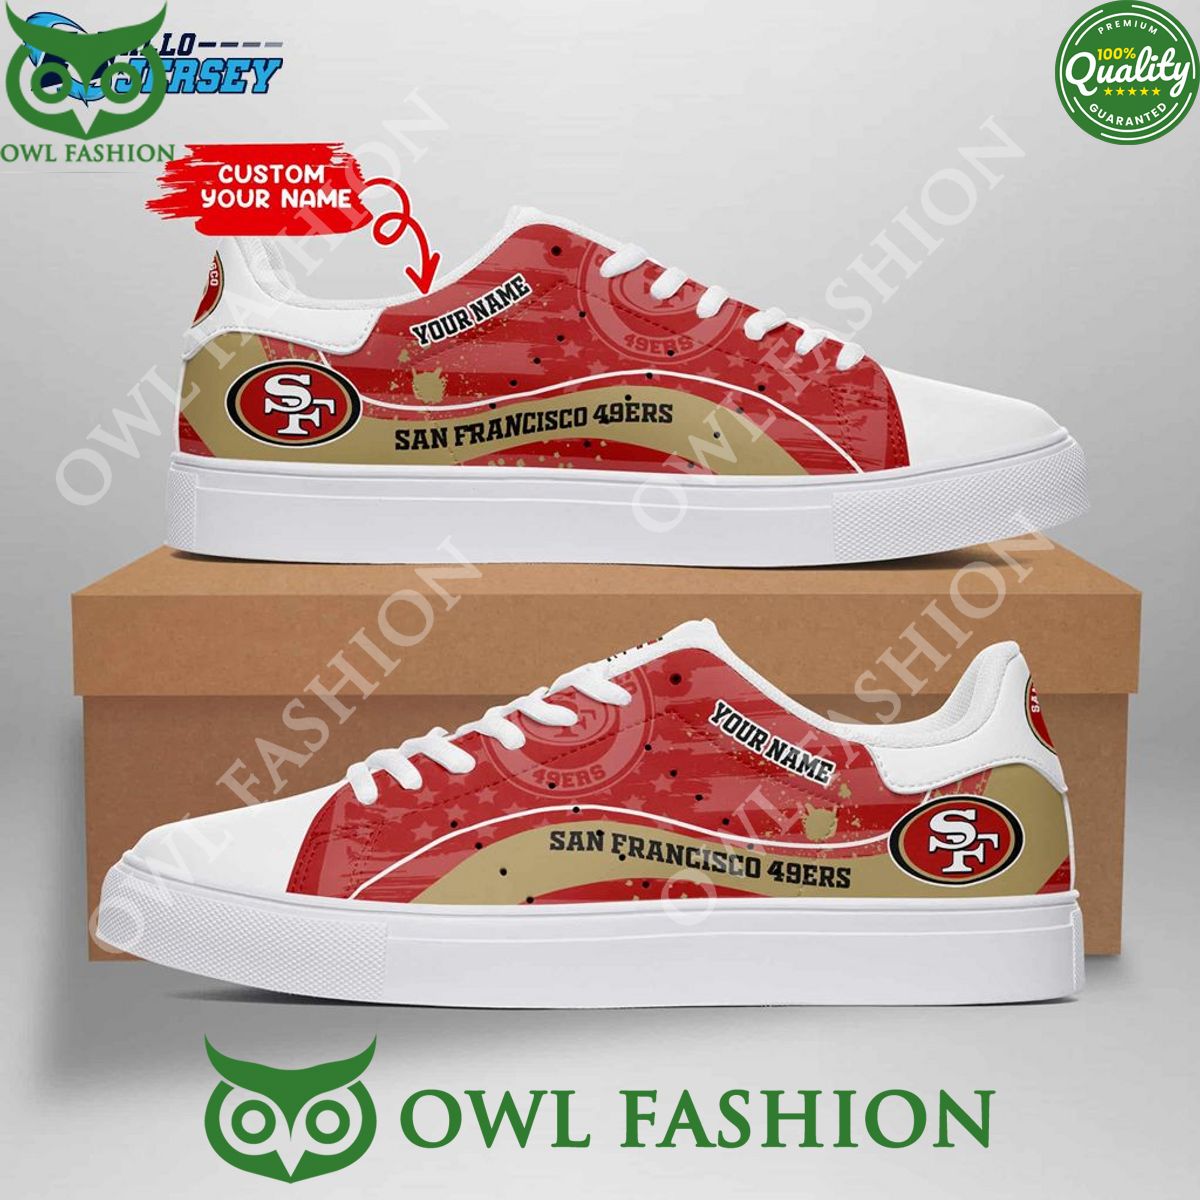 San Francisco 49ers Customized NFL Stan Smith Sneakers Impressive picture.